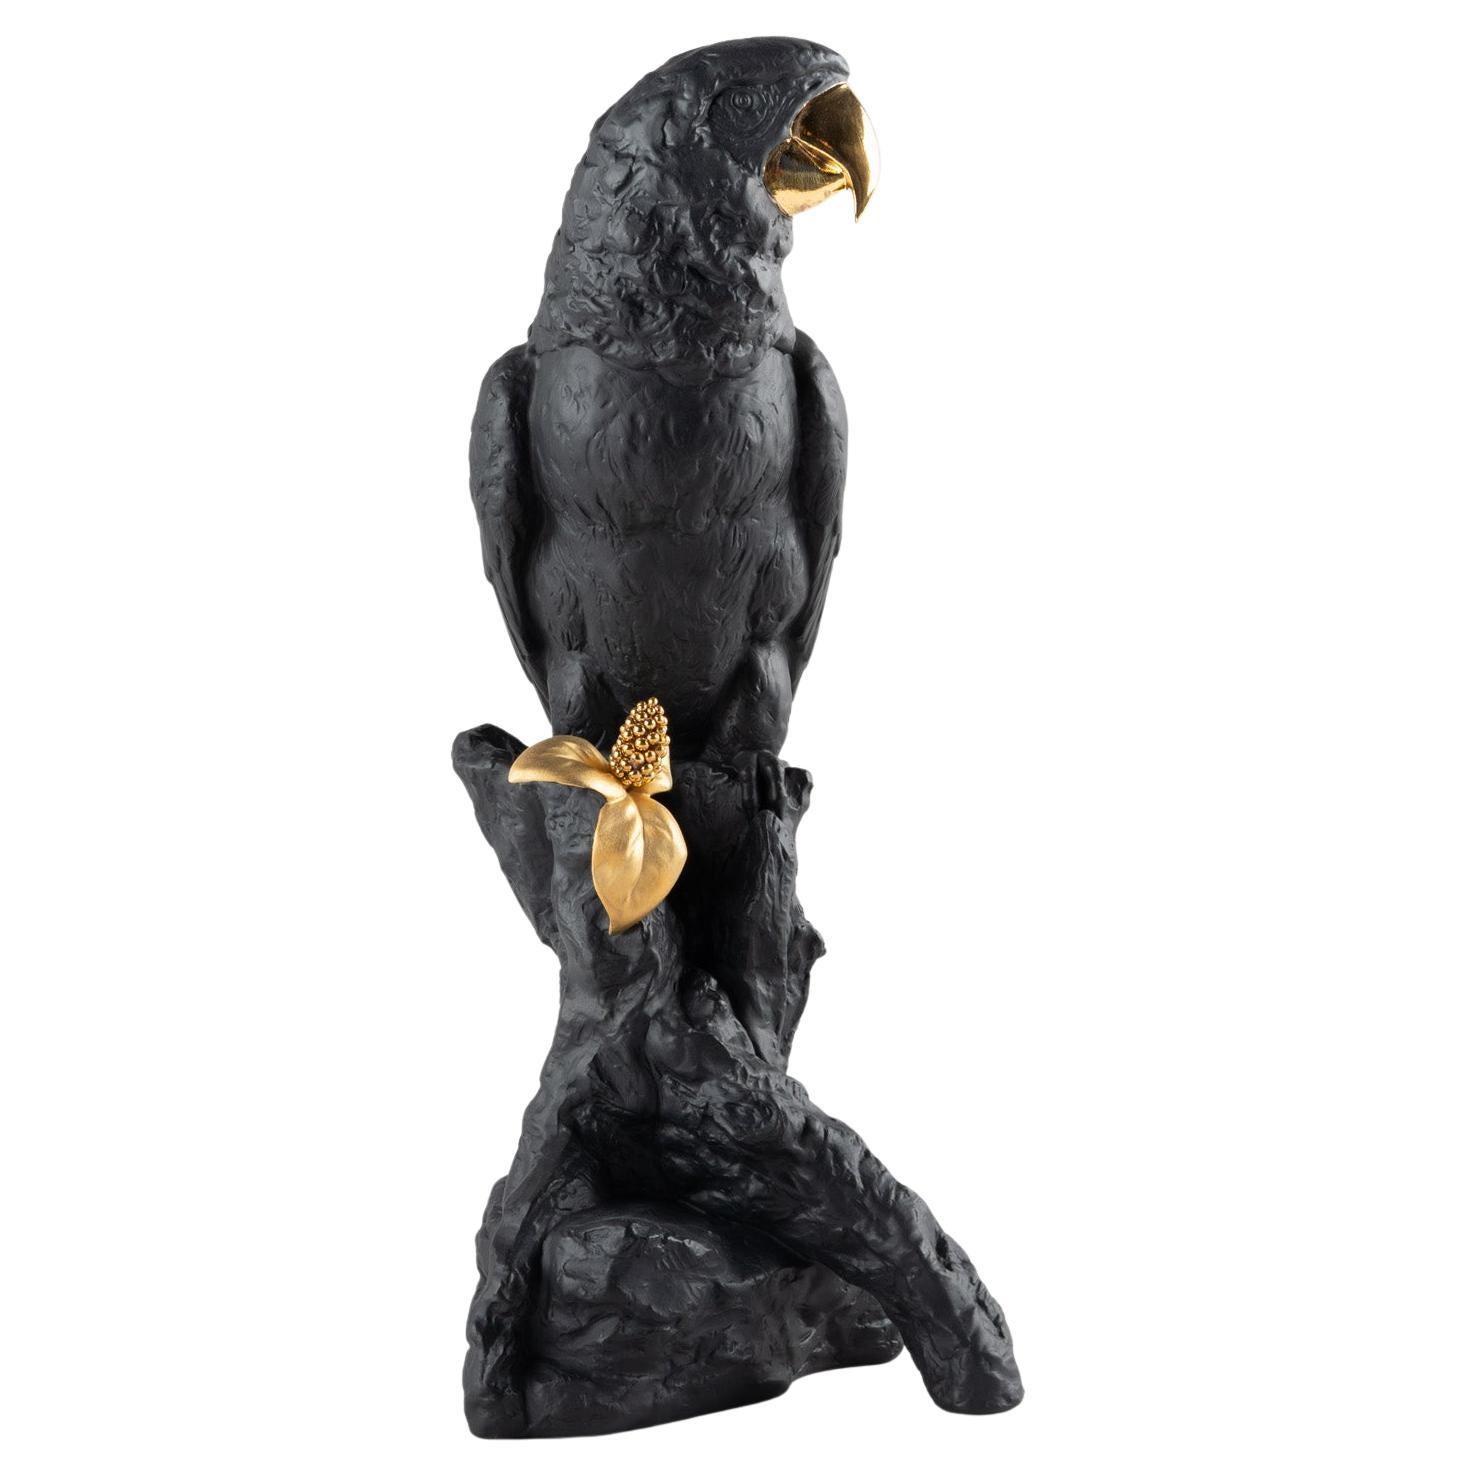 Lladró Macaw Bird Sculpture, Black-Gold, Limited Edition For Sale